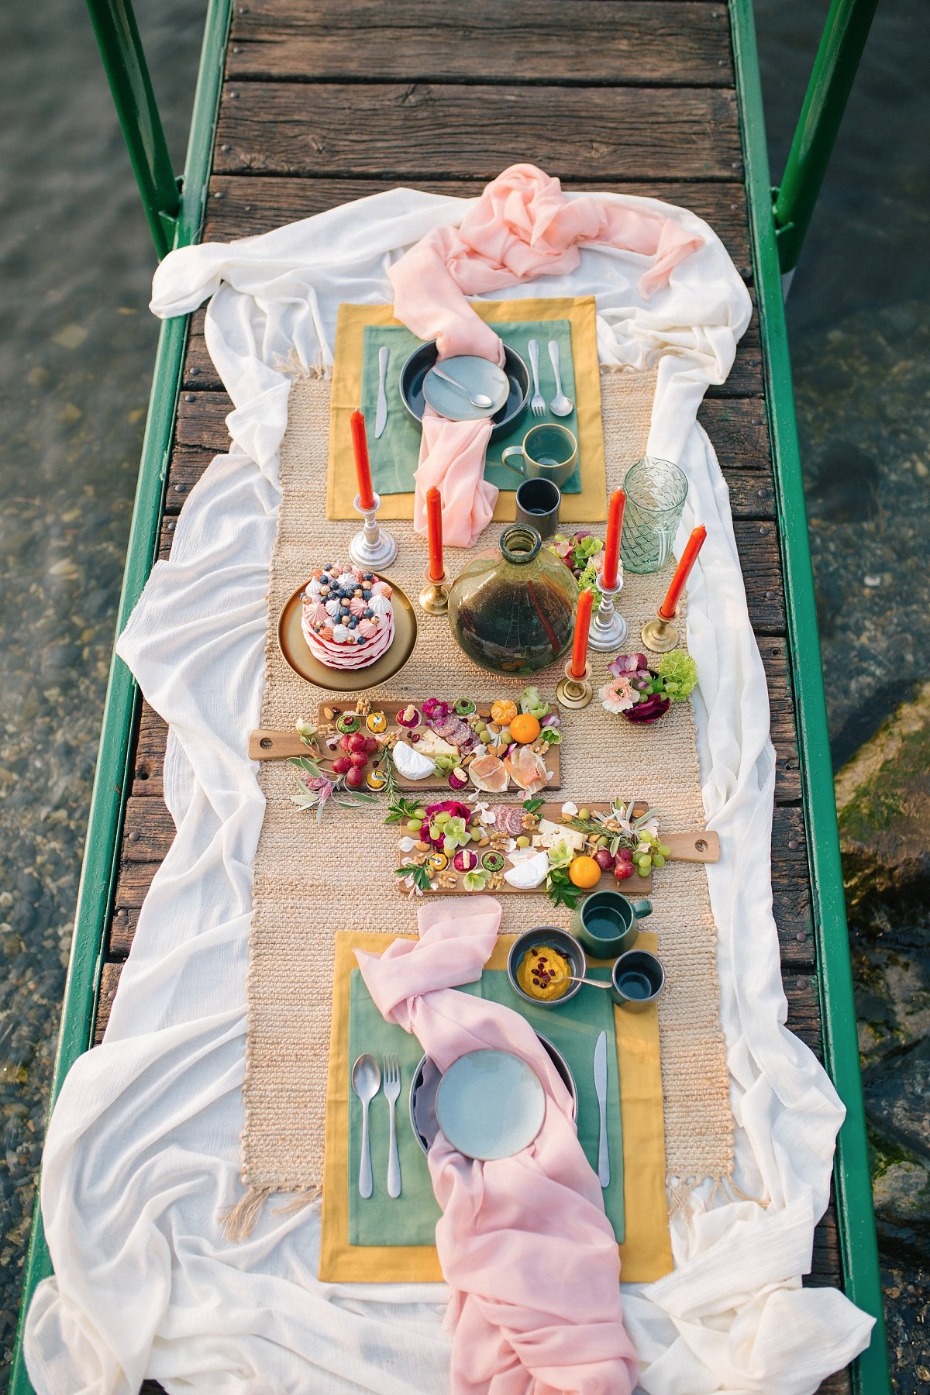 Colorful and yummy dock engagement feast